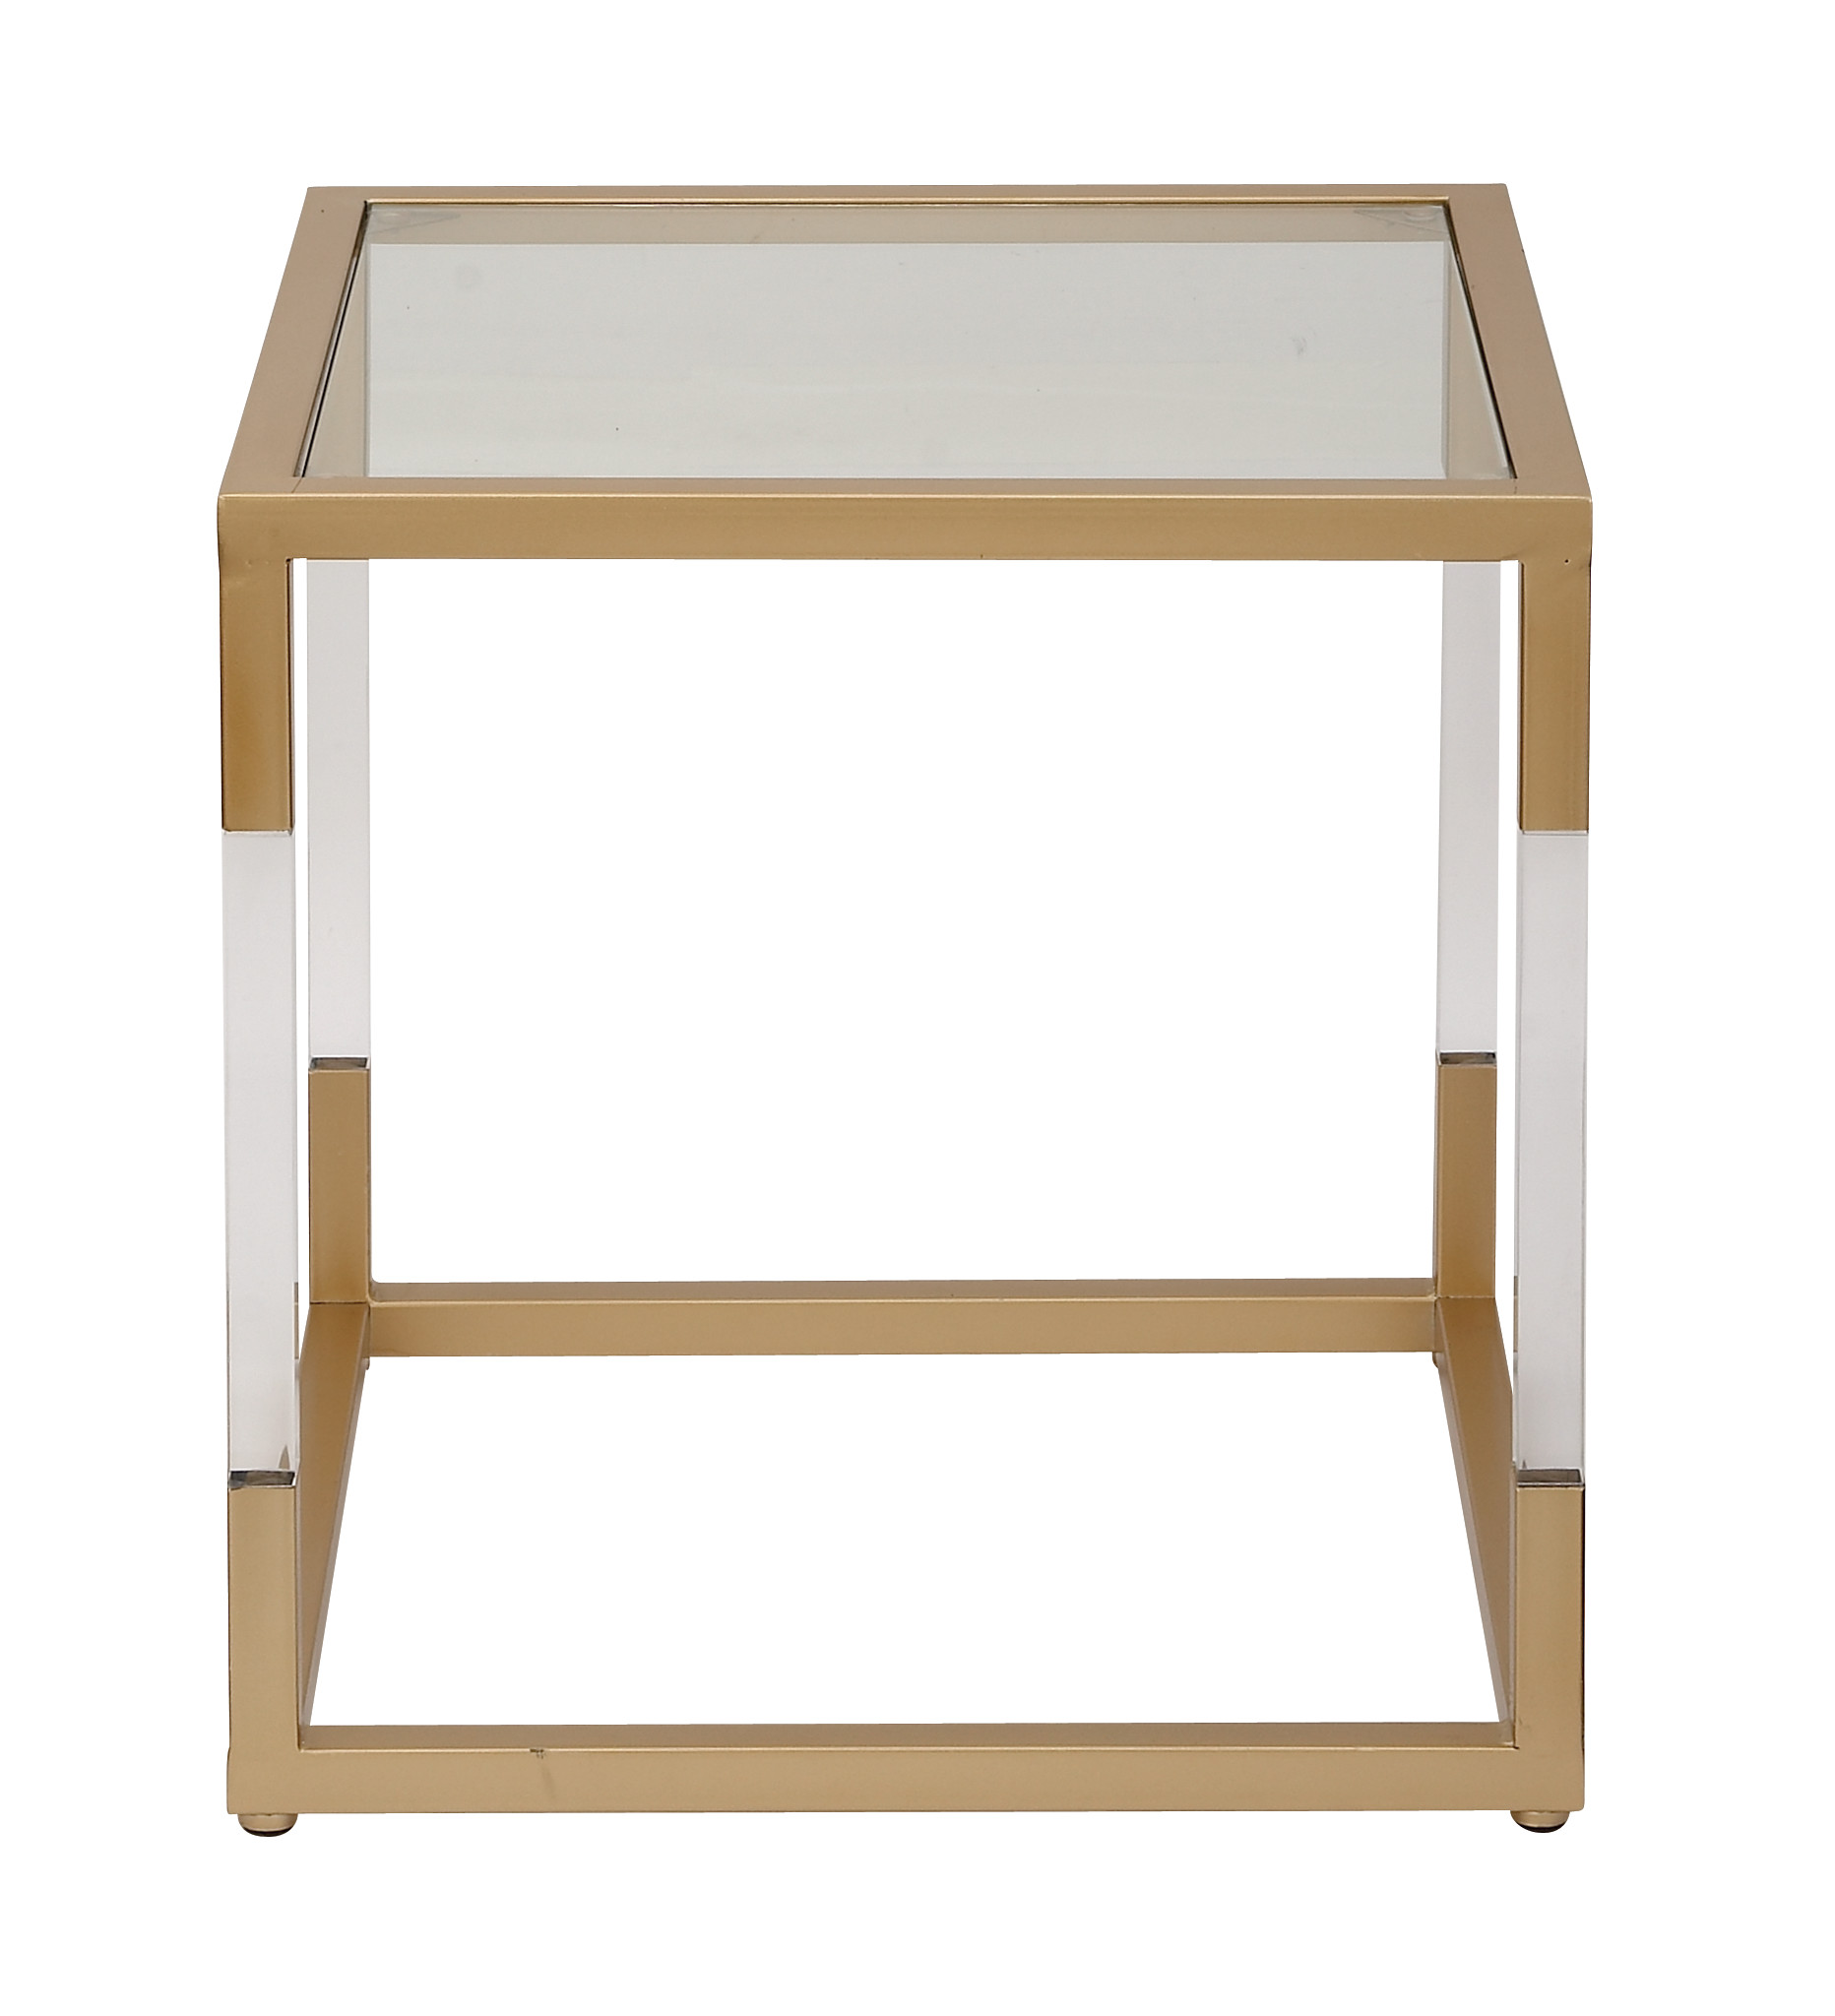 DecMode 19" x 20" Gold Metal Accent Table with Clear Glass Top and Acrylic Legs, 1-Piece - image 1 of 7